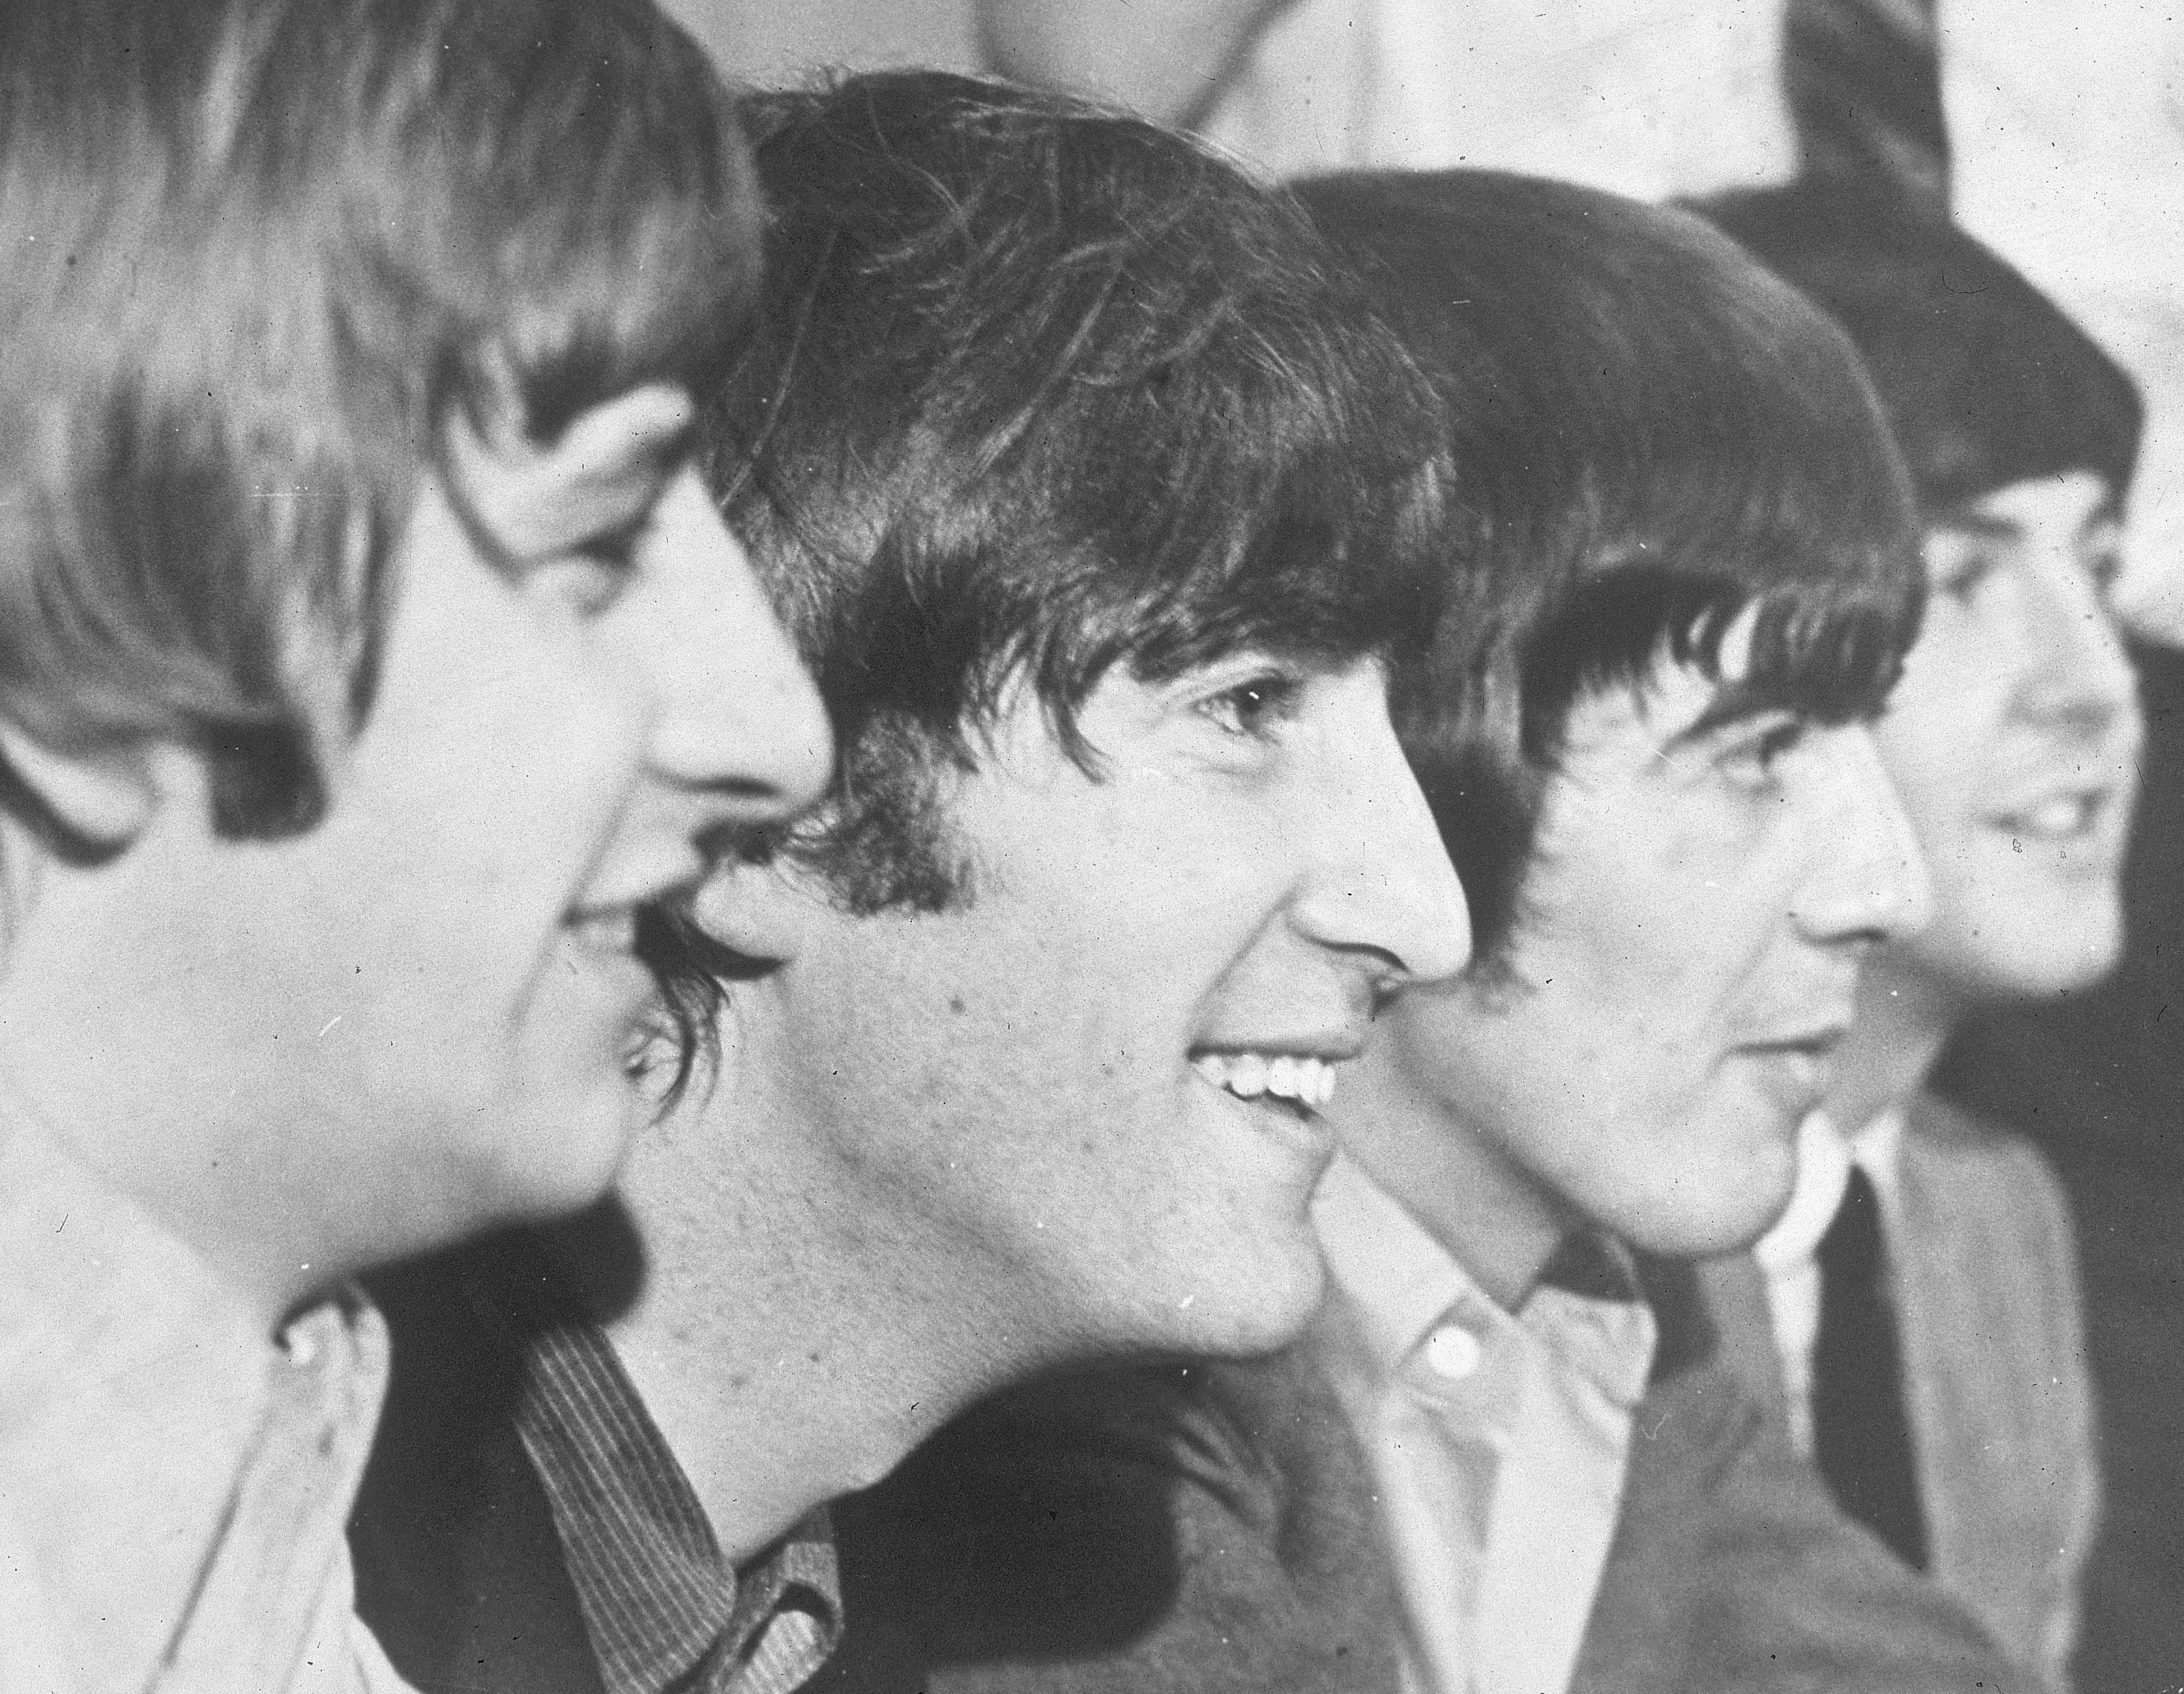 The members of English musical group The Beatles smile for the camera, (L to R): Ringo Starr, John Lennon, George Harrison, and Paul McCartney, 1966